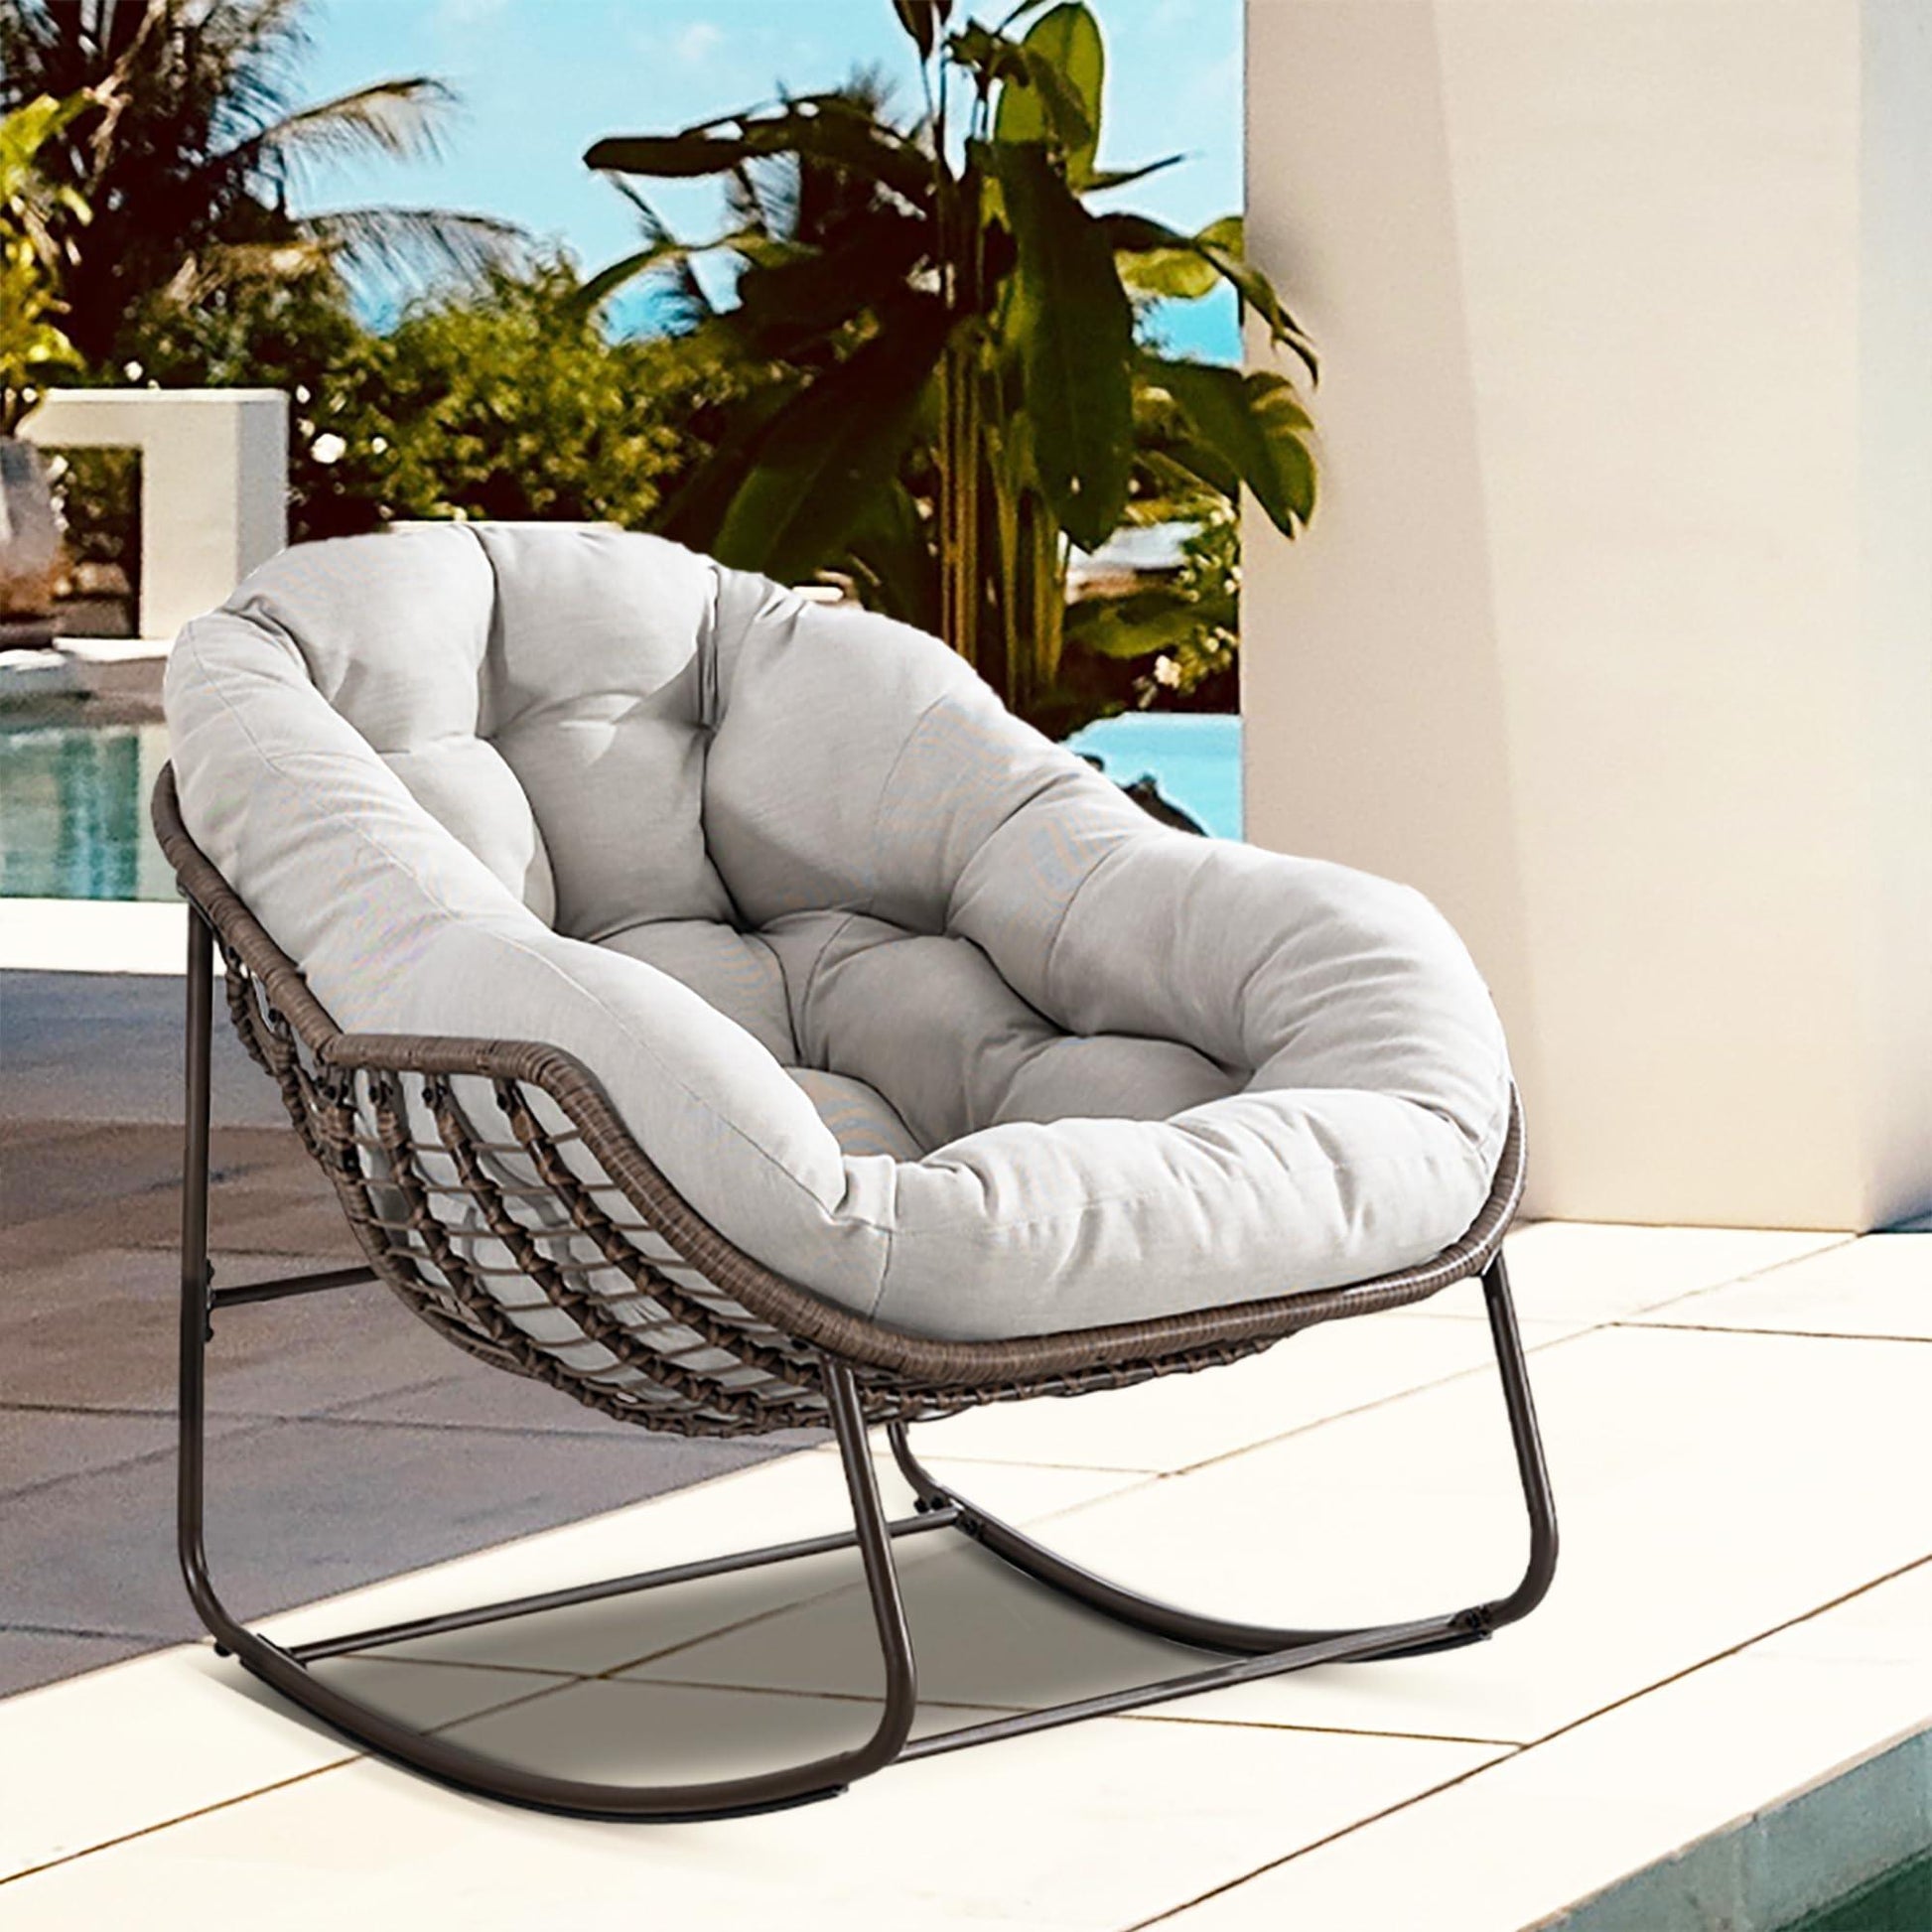 Villeston Outdoor Papasan Rocking Chair - Oversized Comfy Patio Chair Indoor Egg Royal Rattan Rocking Chair with Cushion for Front Porch Lounge Lawn Bedroom Living Room (Beige Grey) - CookCave